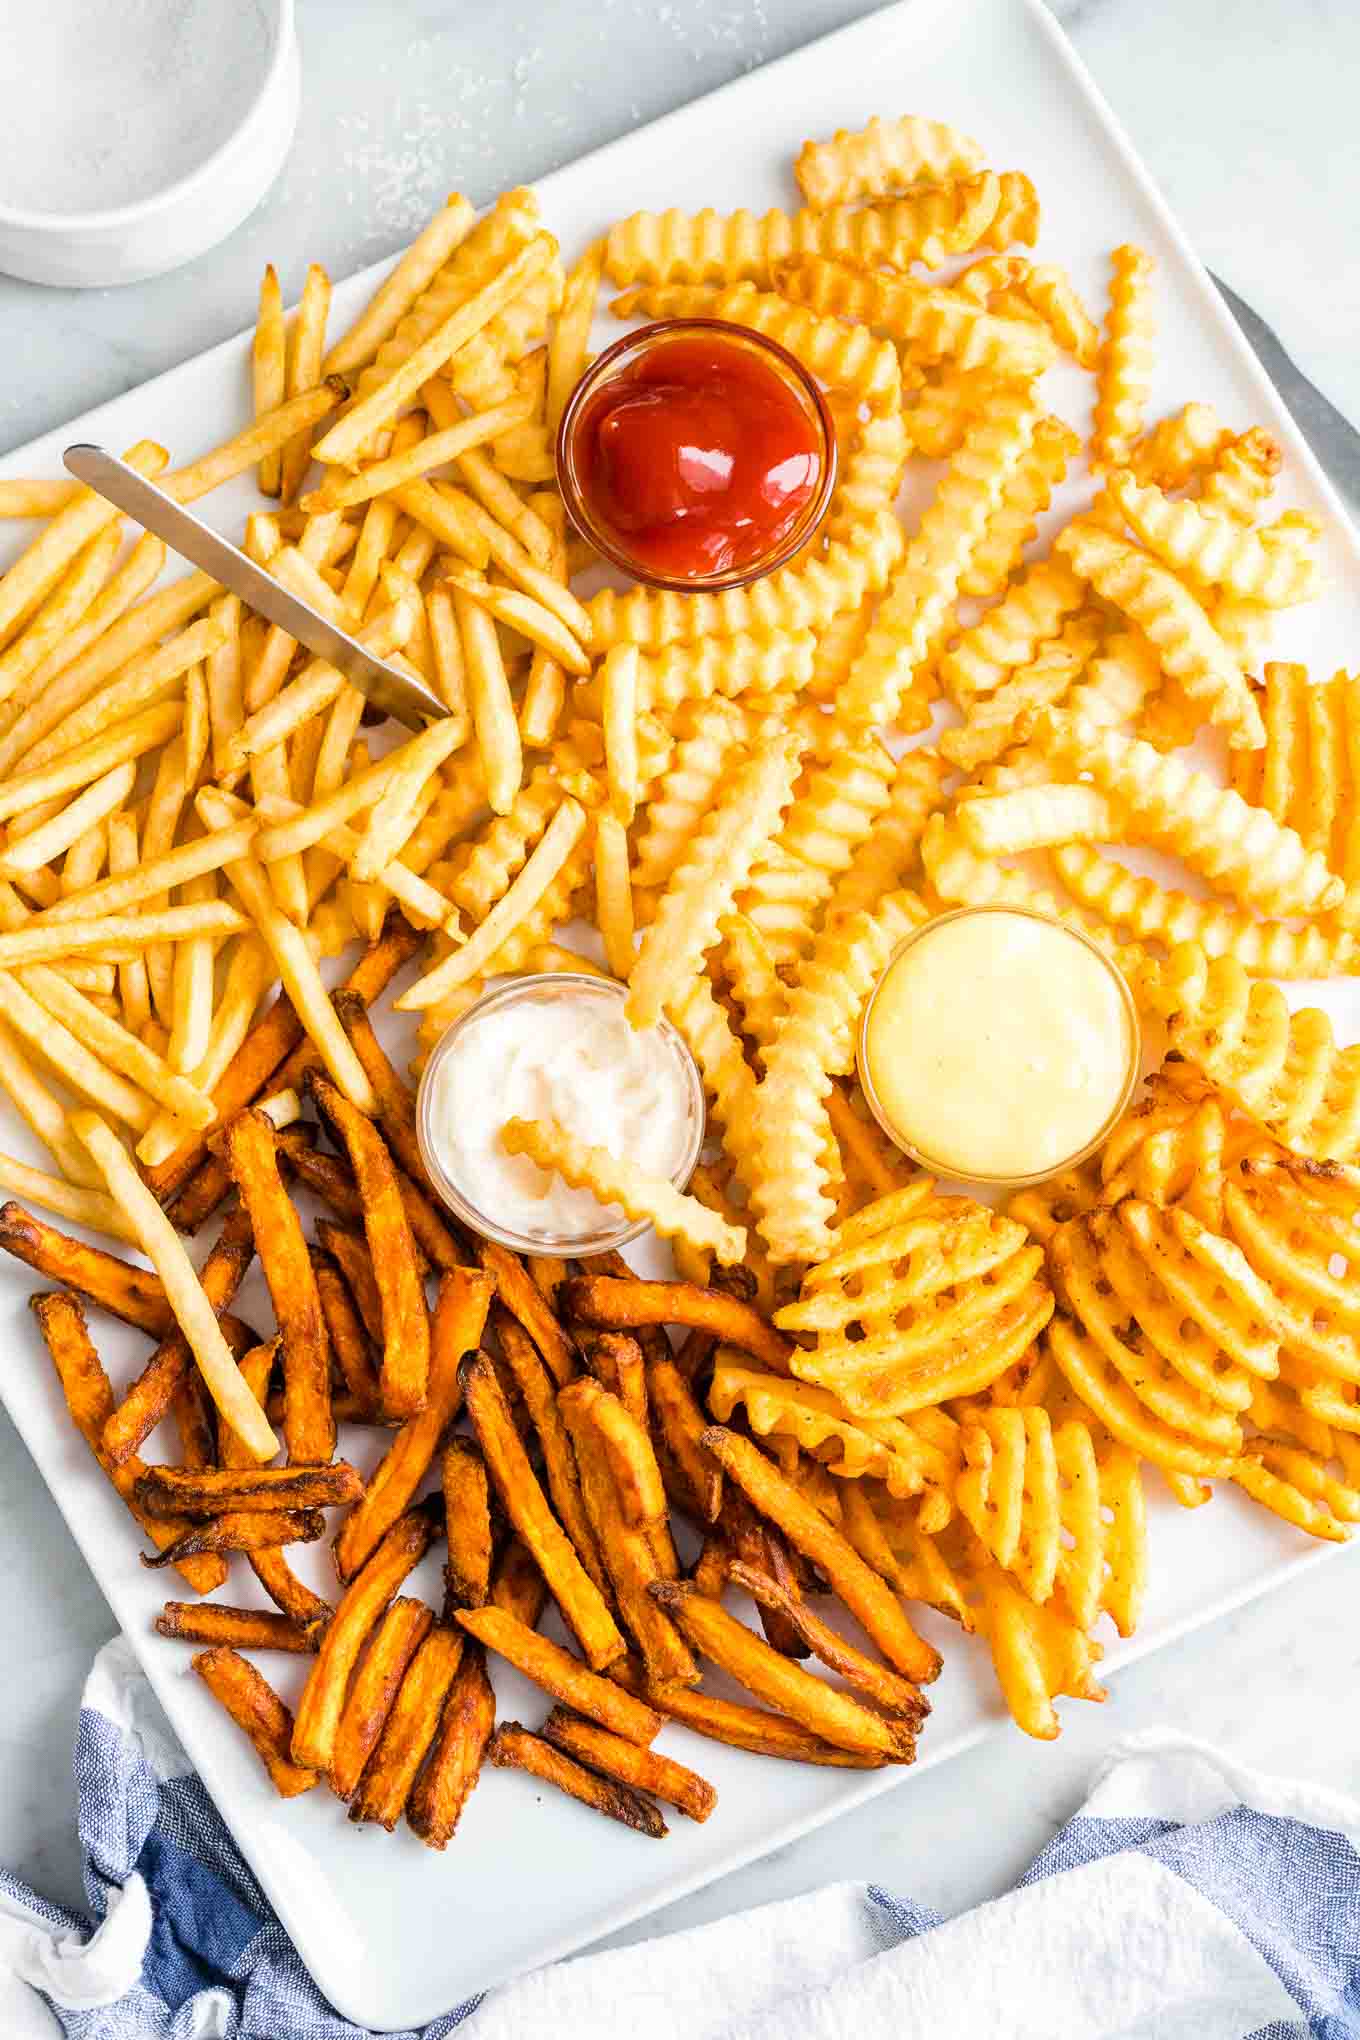 How to Cook Frozen French Fries in an Air Fryer: Expert Tips for Perfectly Crispy Results